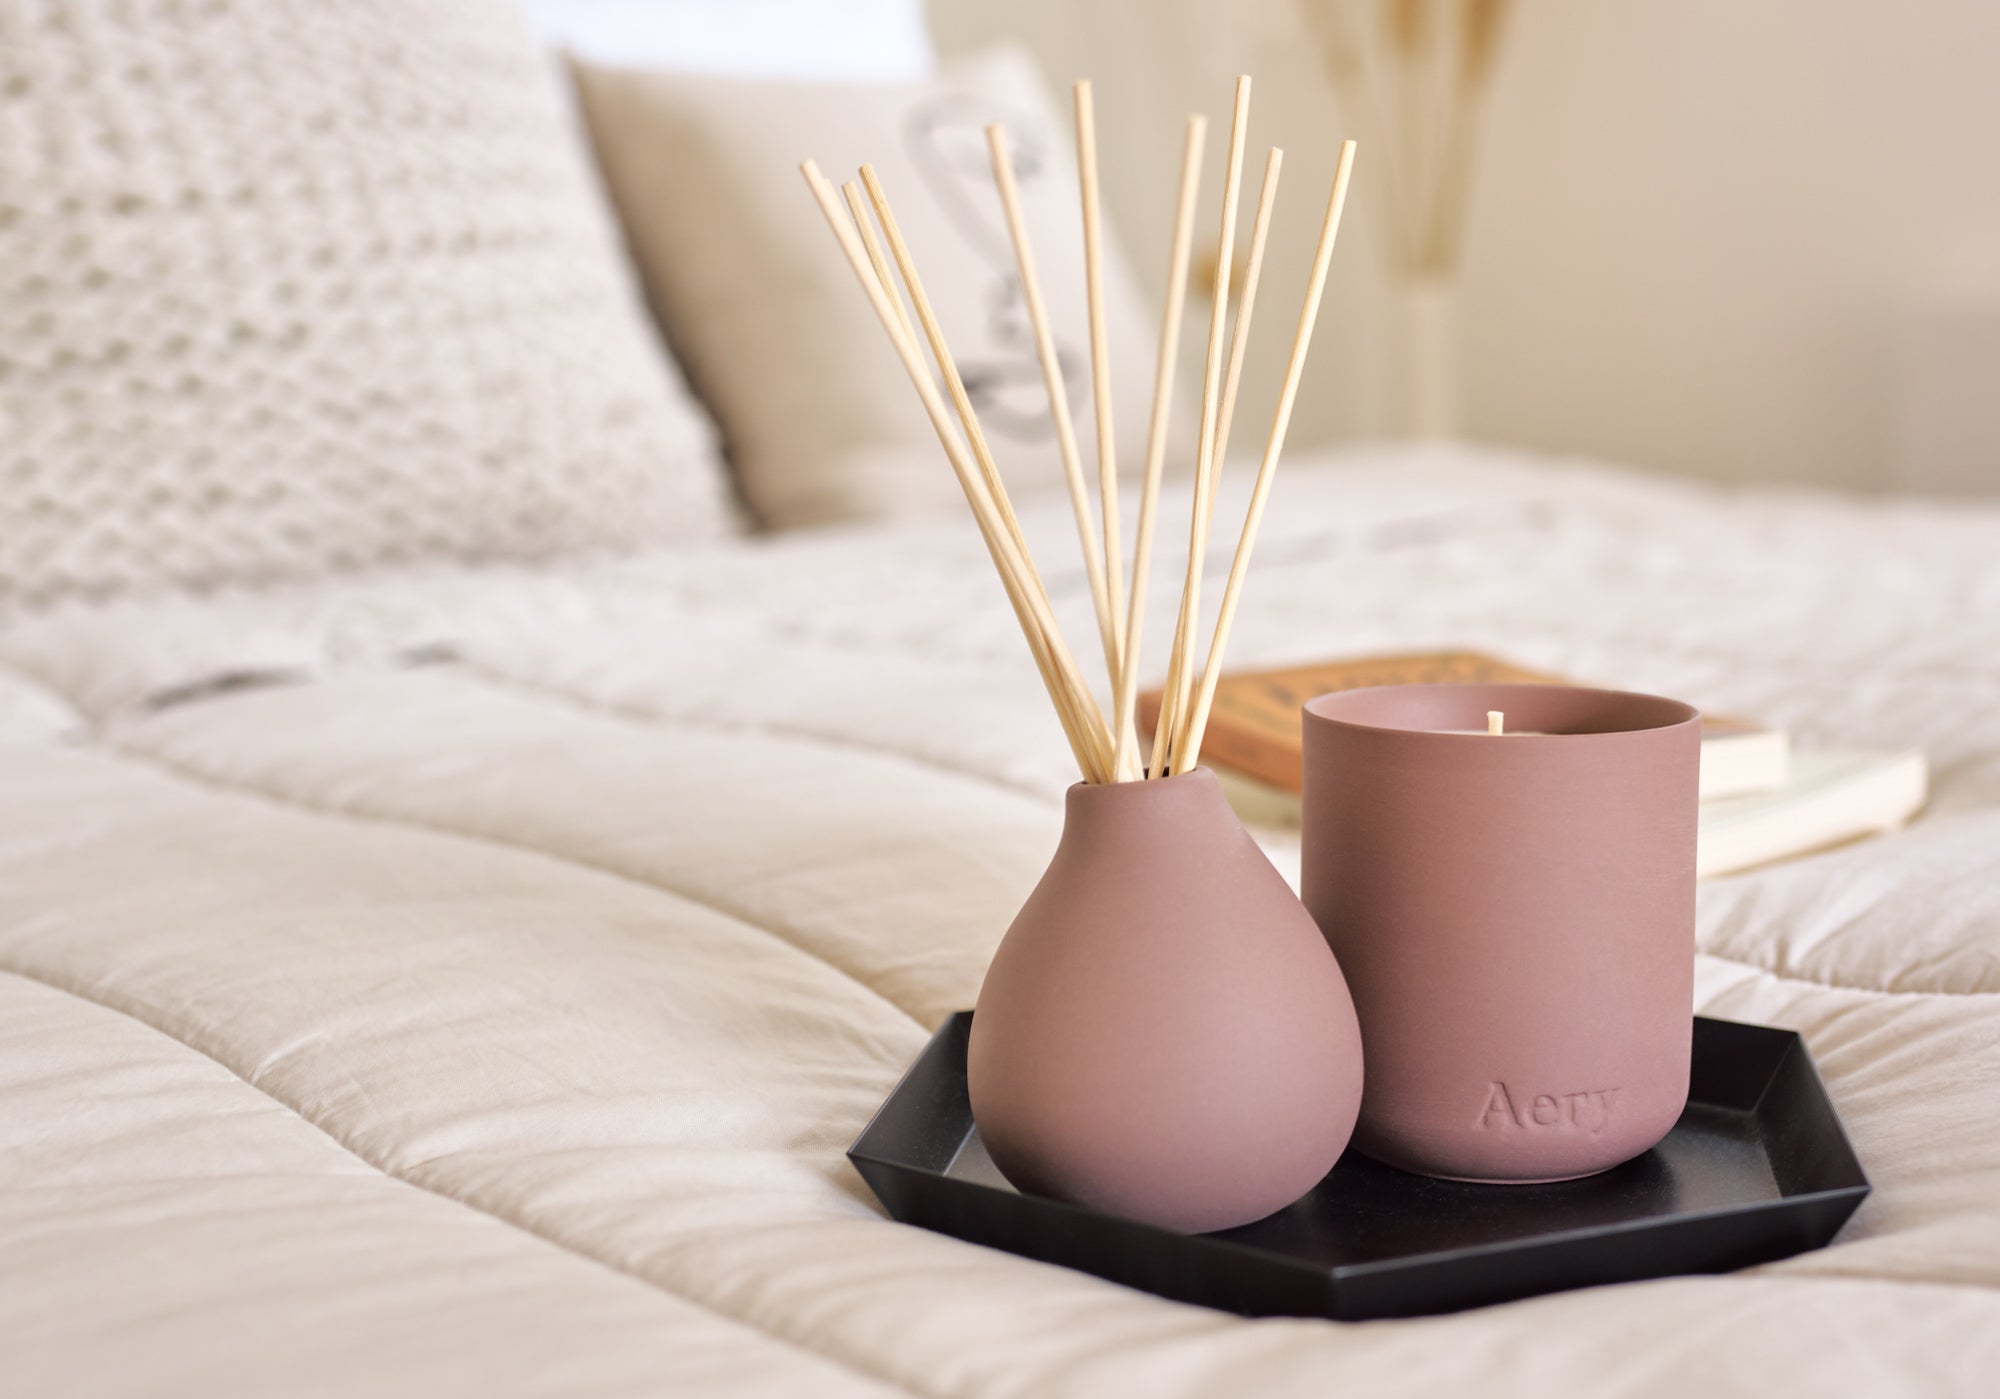 moroccan rose mauve ceramic scented candle and matching diffuser from Aery displayed in bedroom setting